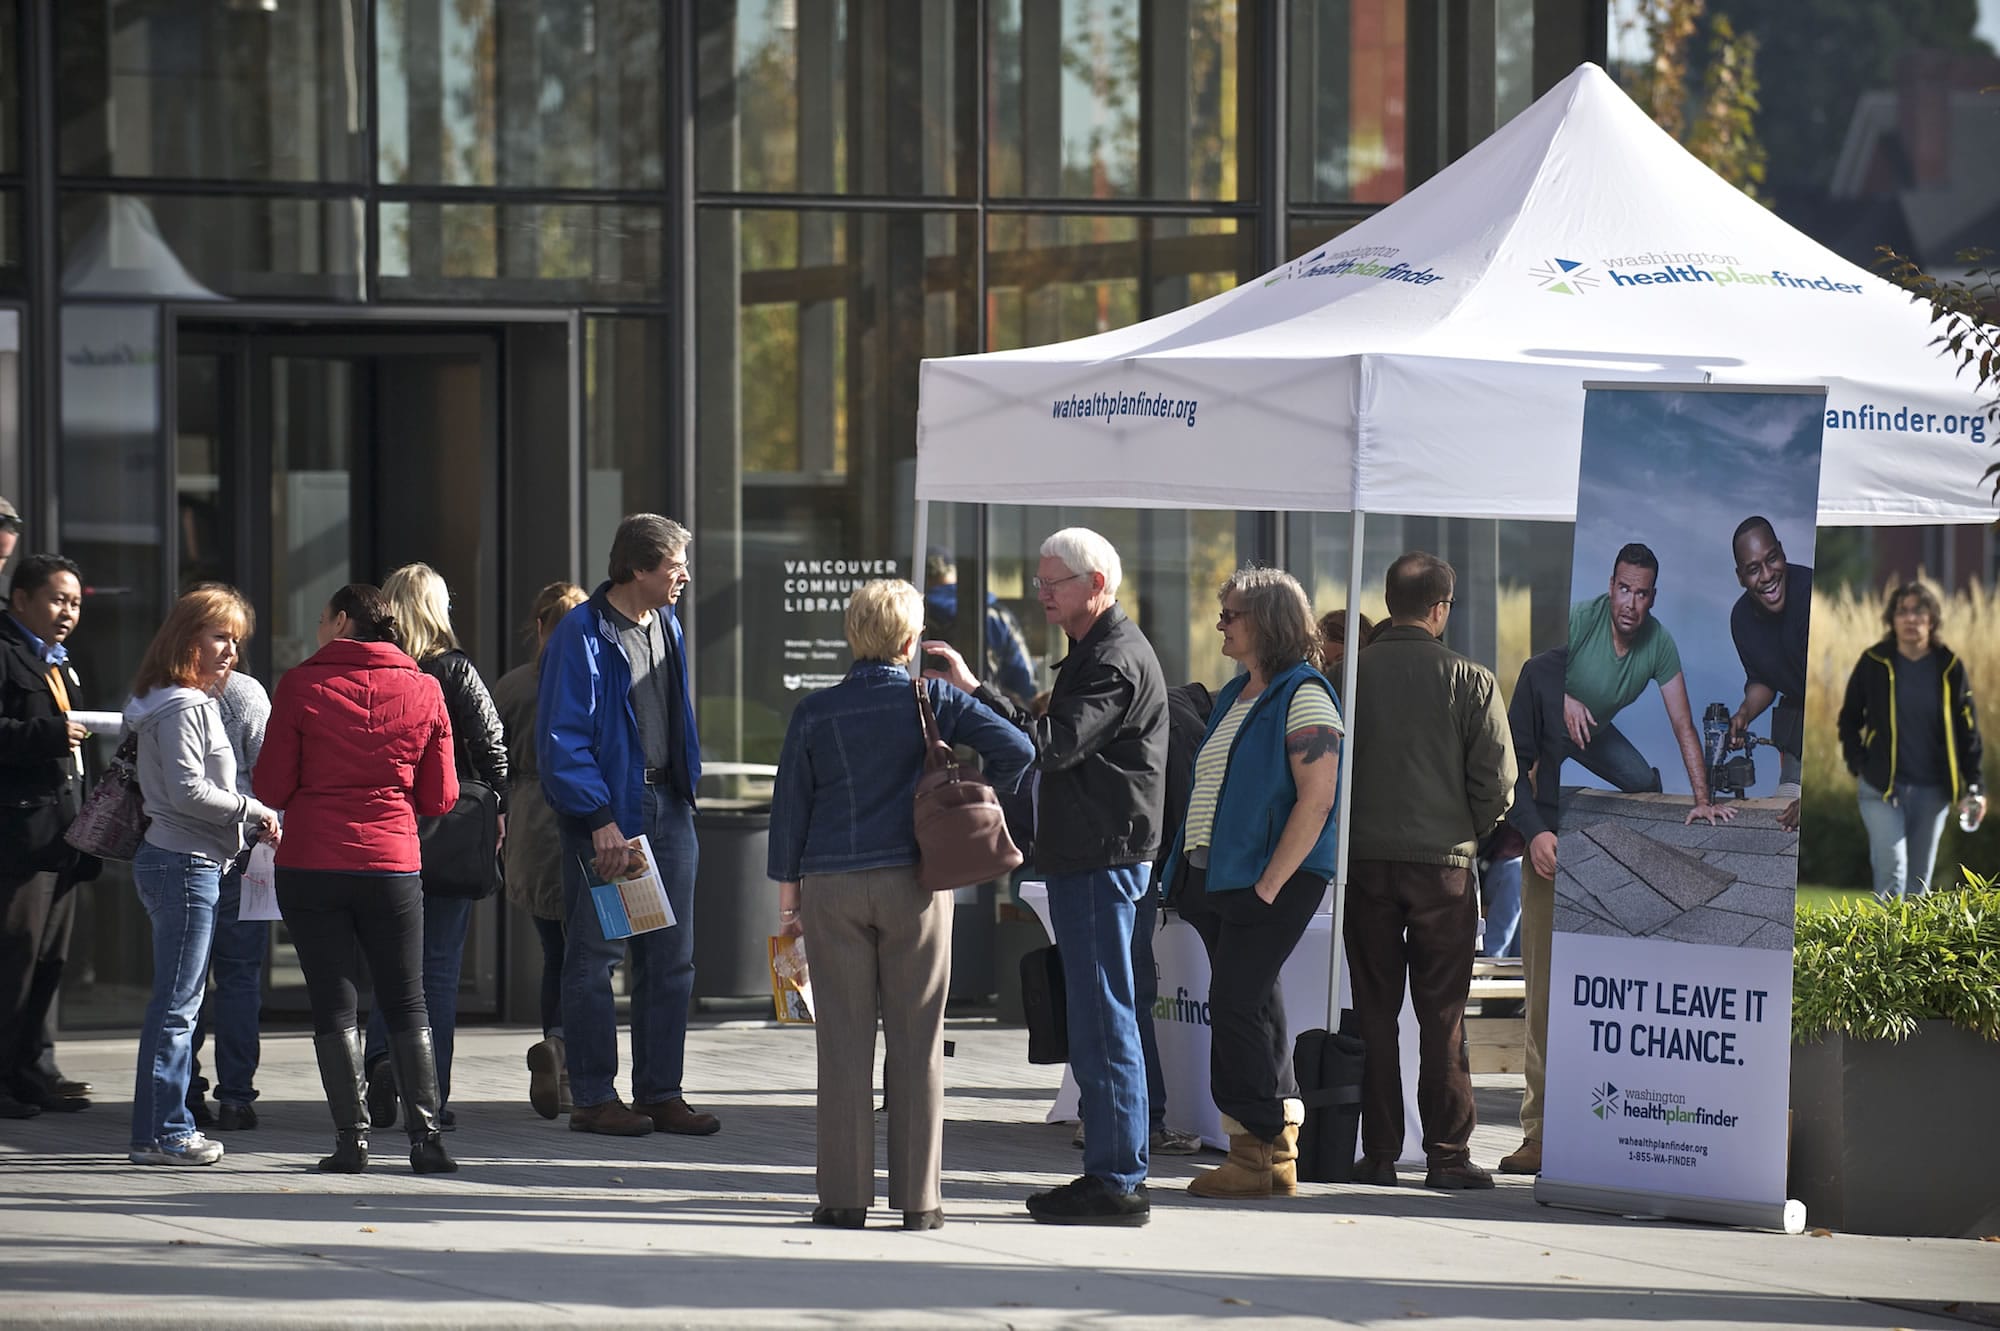 Nearly 100 Clark County residents signed up for more information and follow-up appointments during a Washington Healthplanfinder mobile tour stop at the Vancouver Community Library on Wednesday.